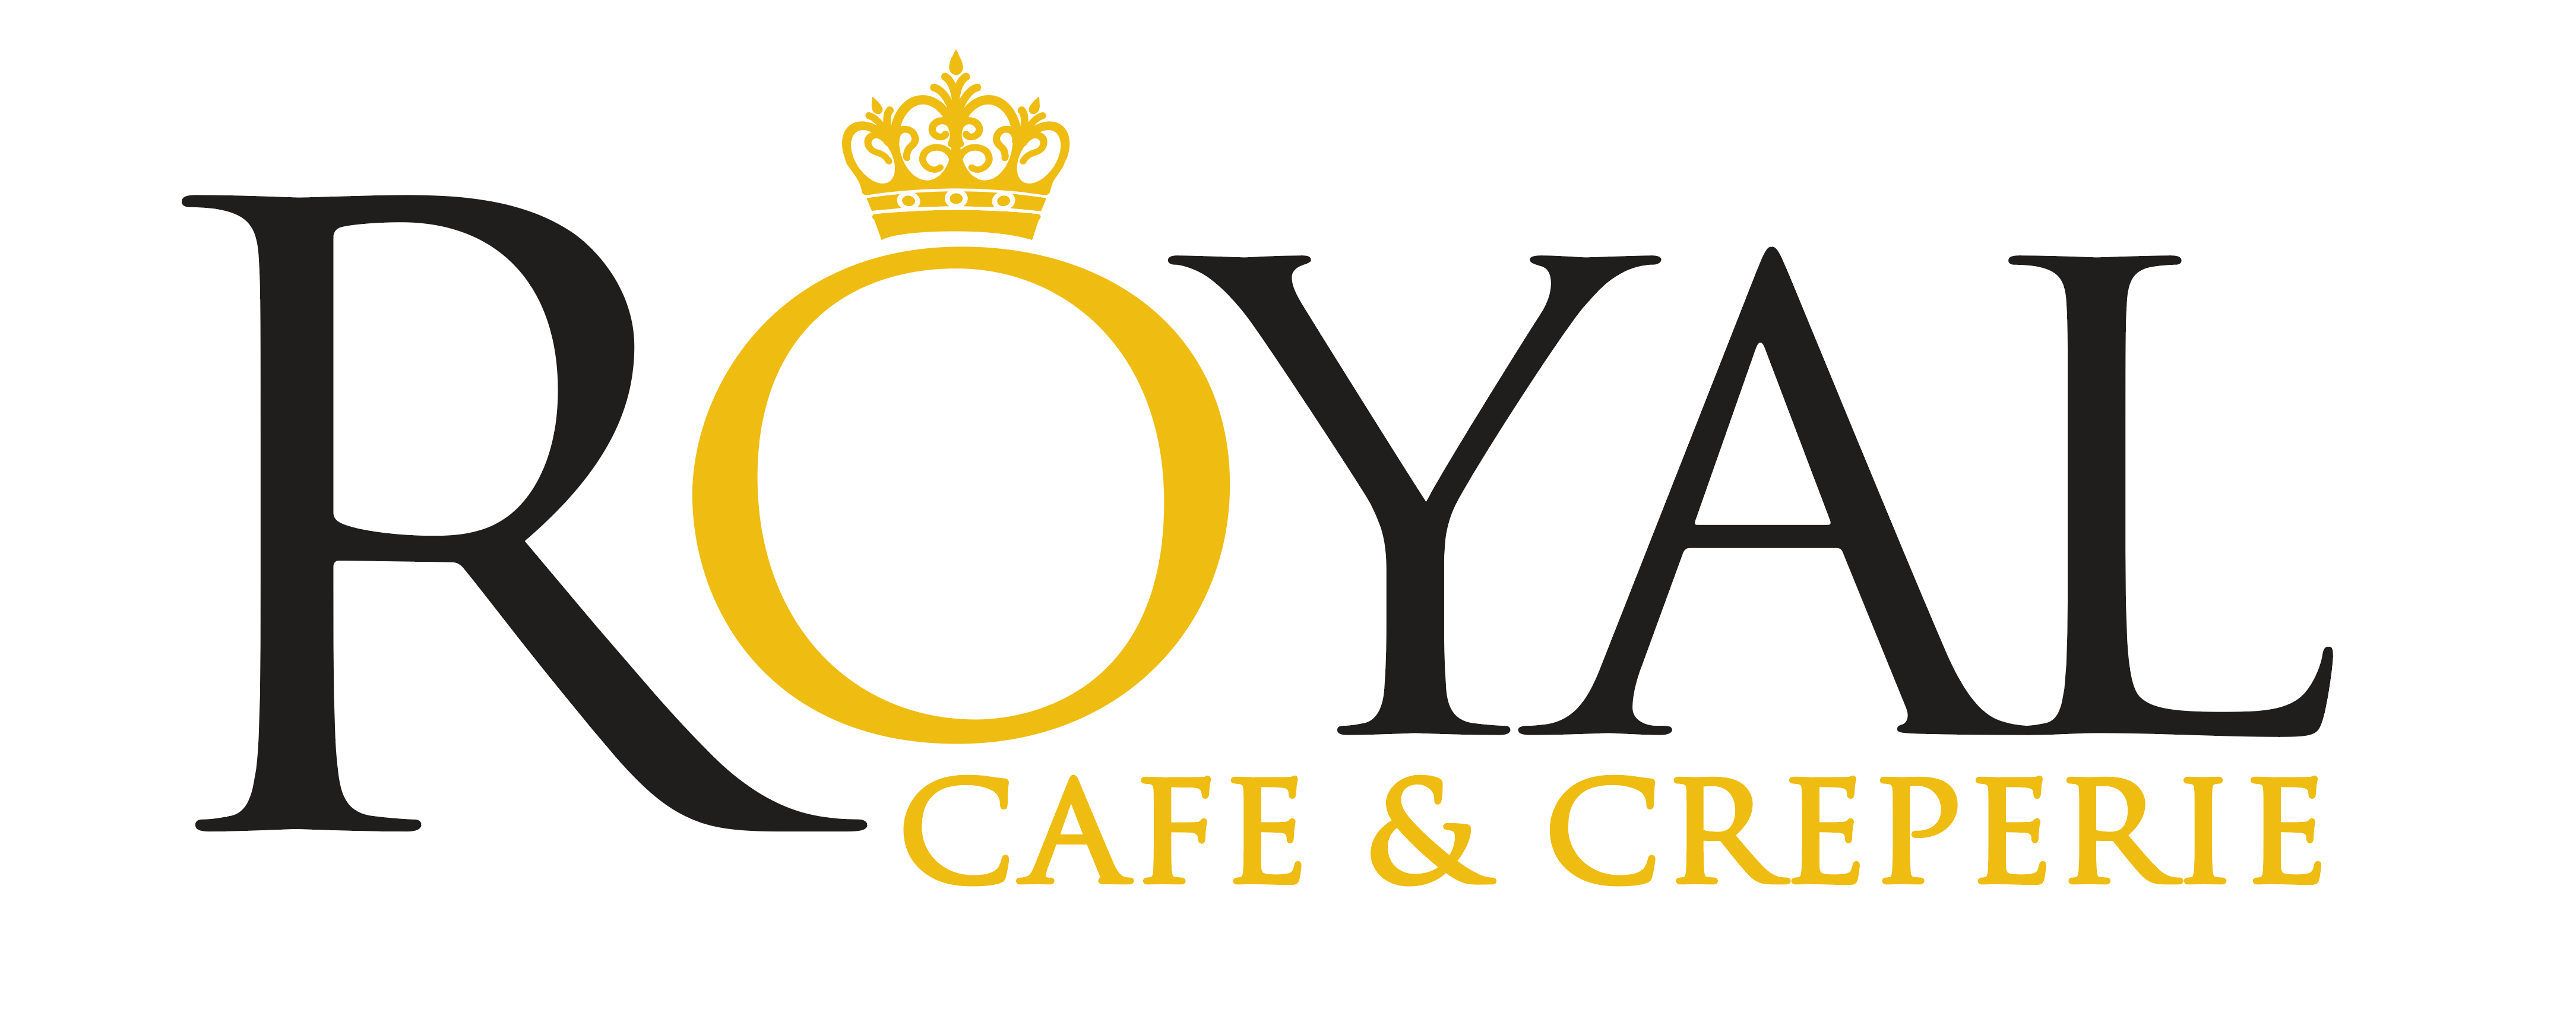 Royal Cafe & Creperie